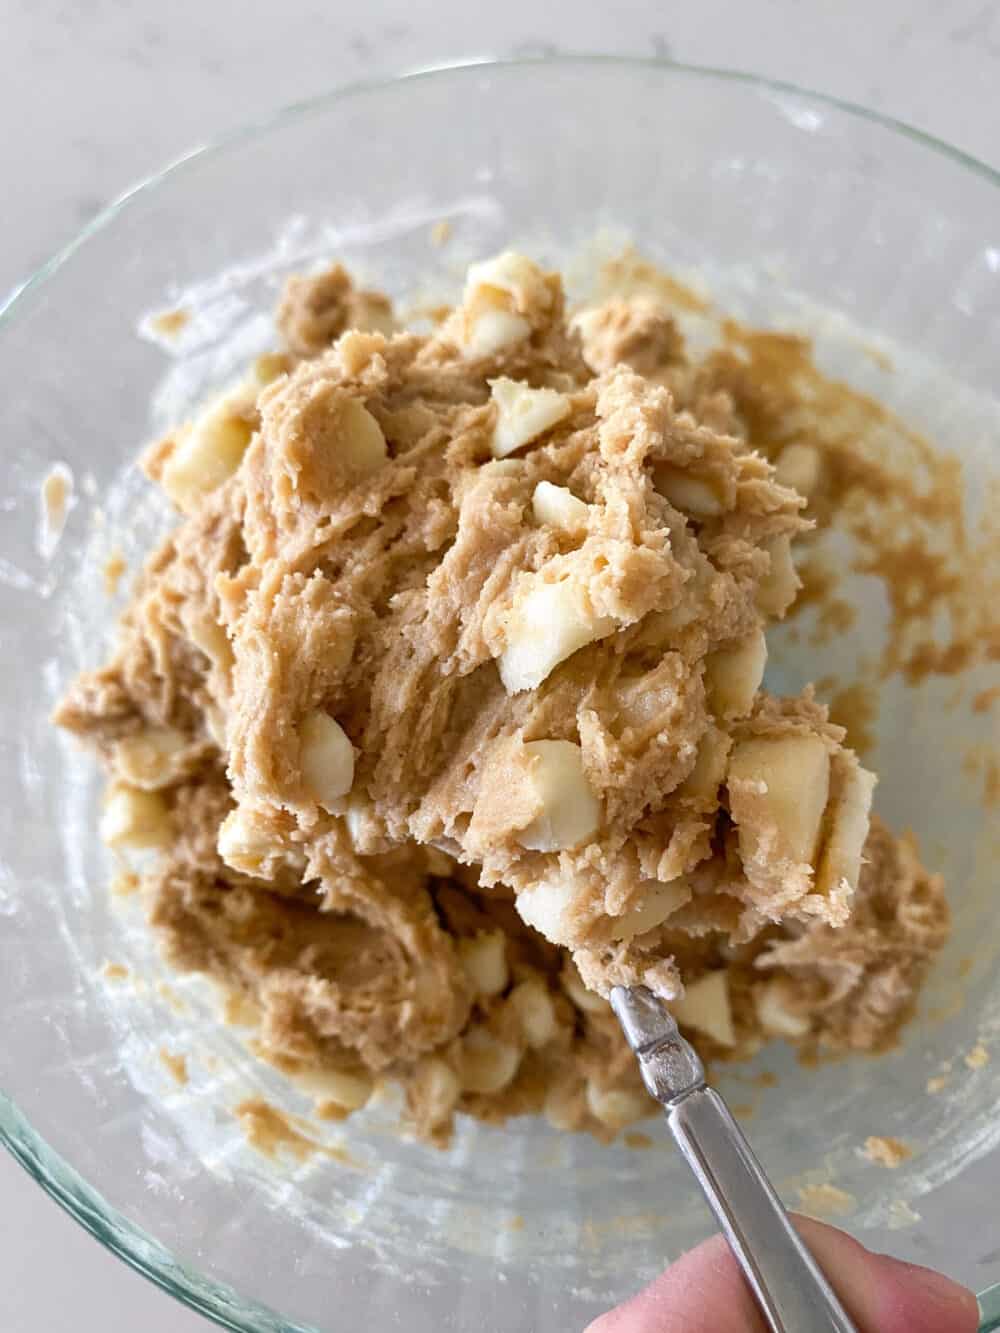 Mixing White Chocolate Chips into the Peanut Butter Apple Cookie Dough